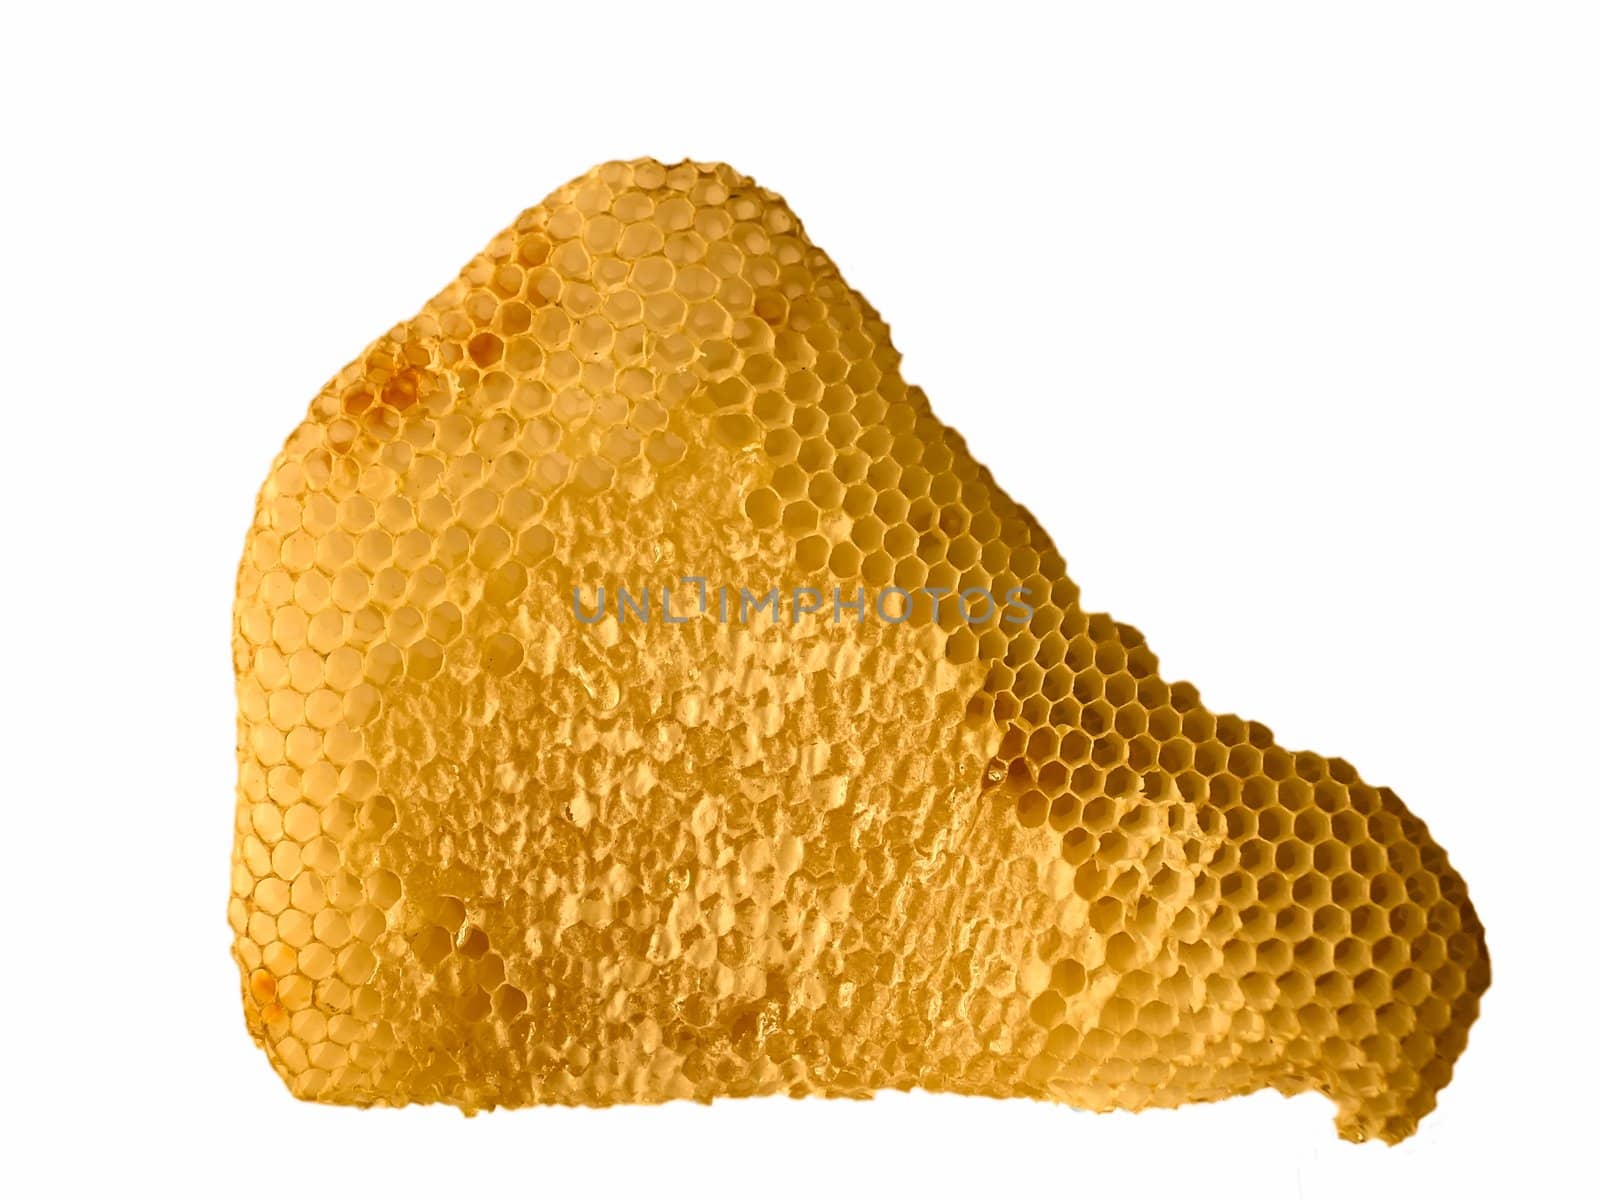 Honeycomb with honey isolated on a white background